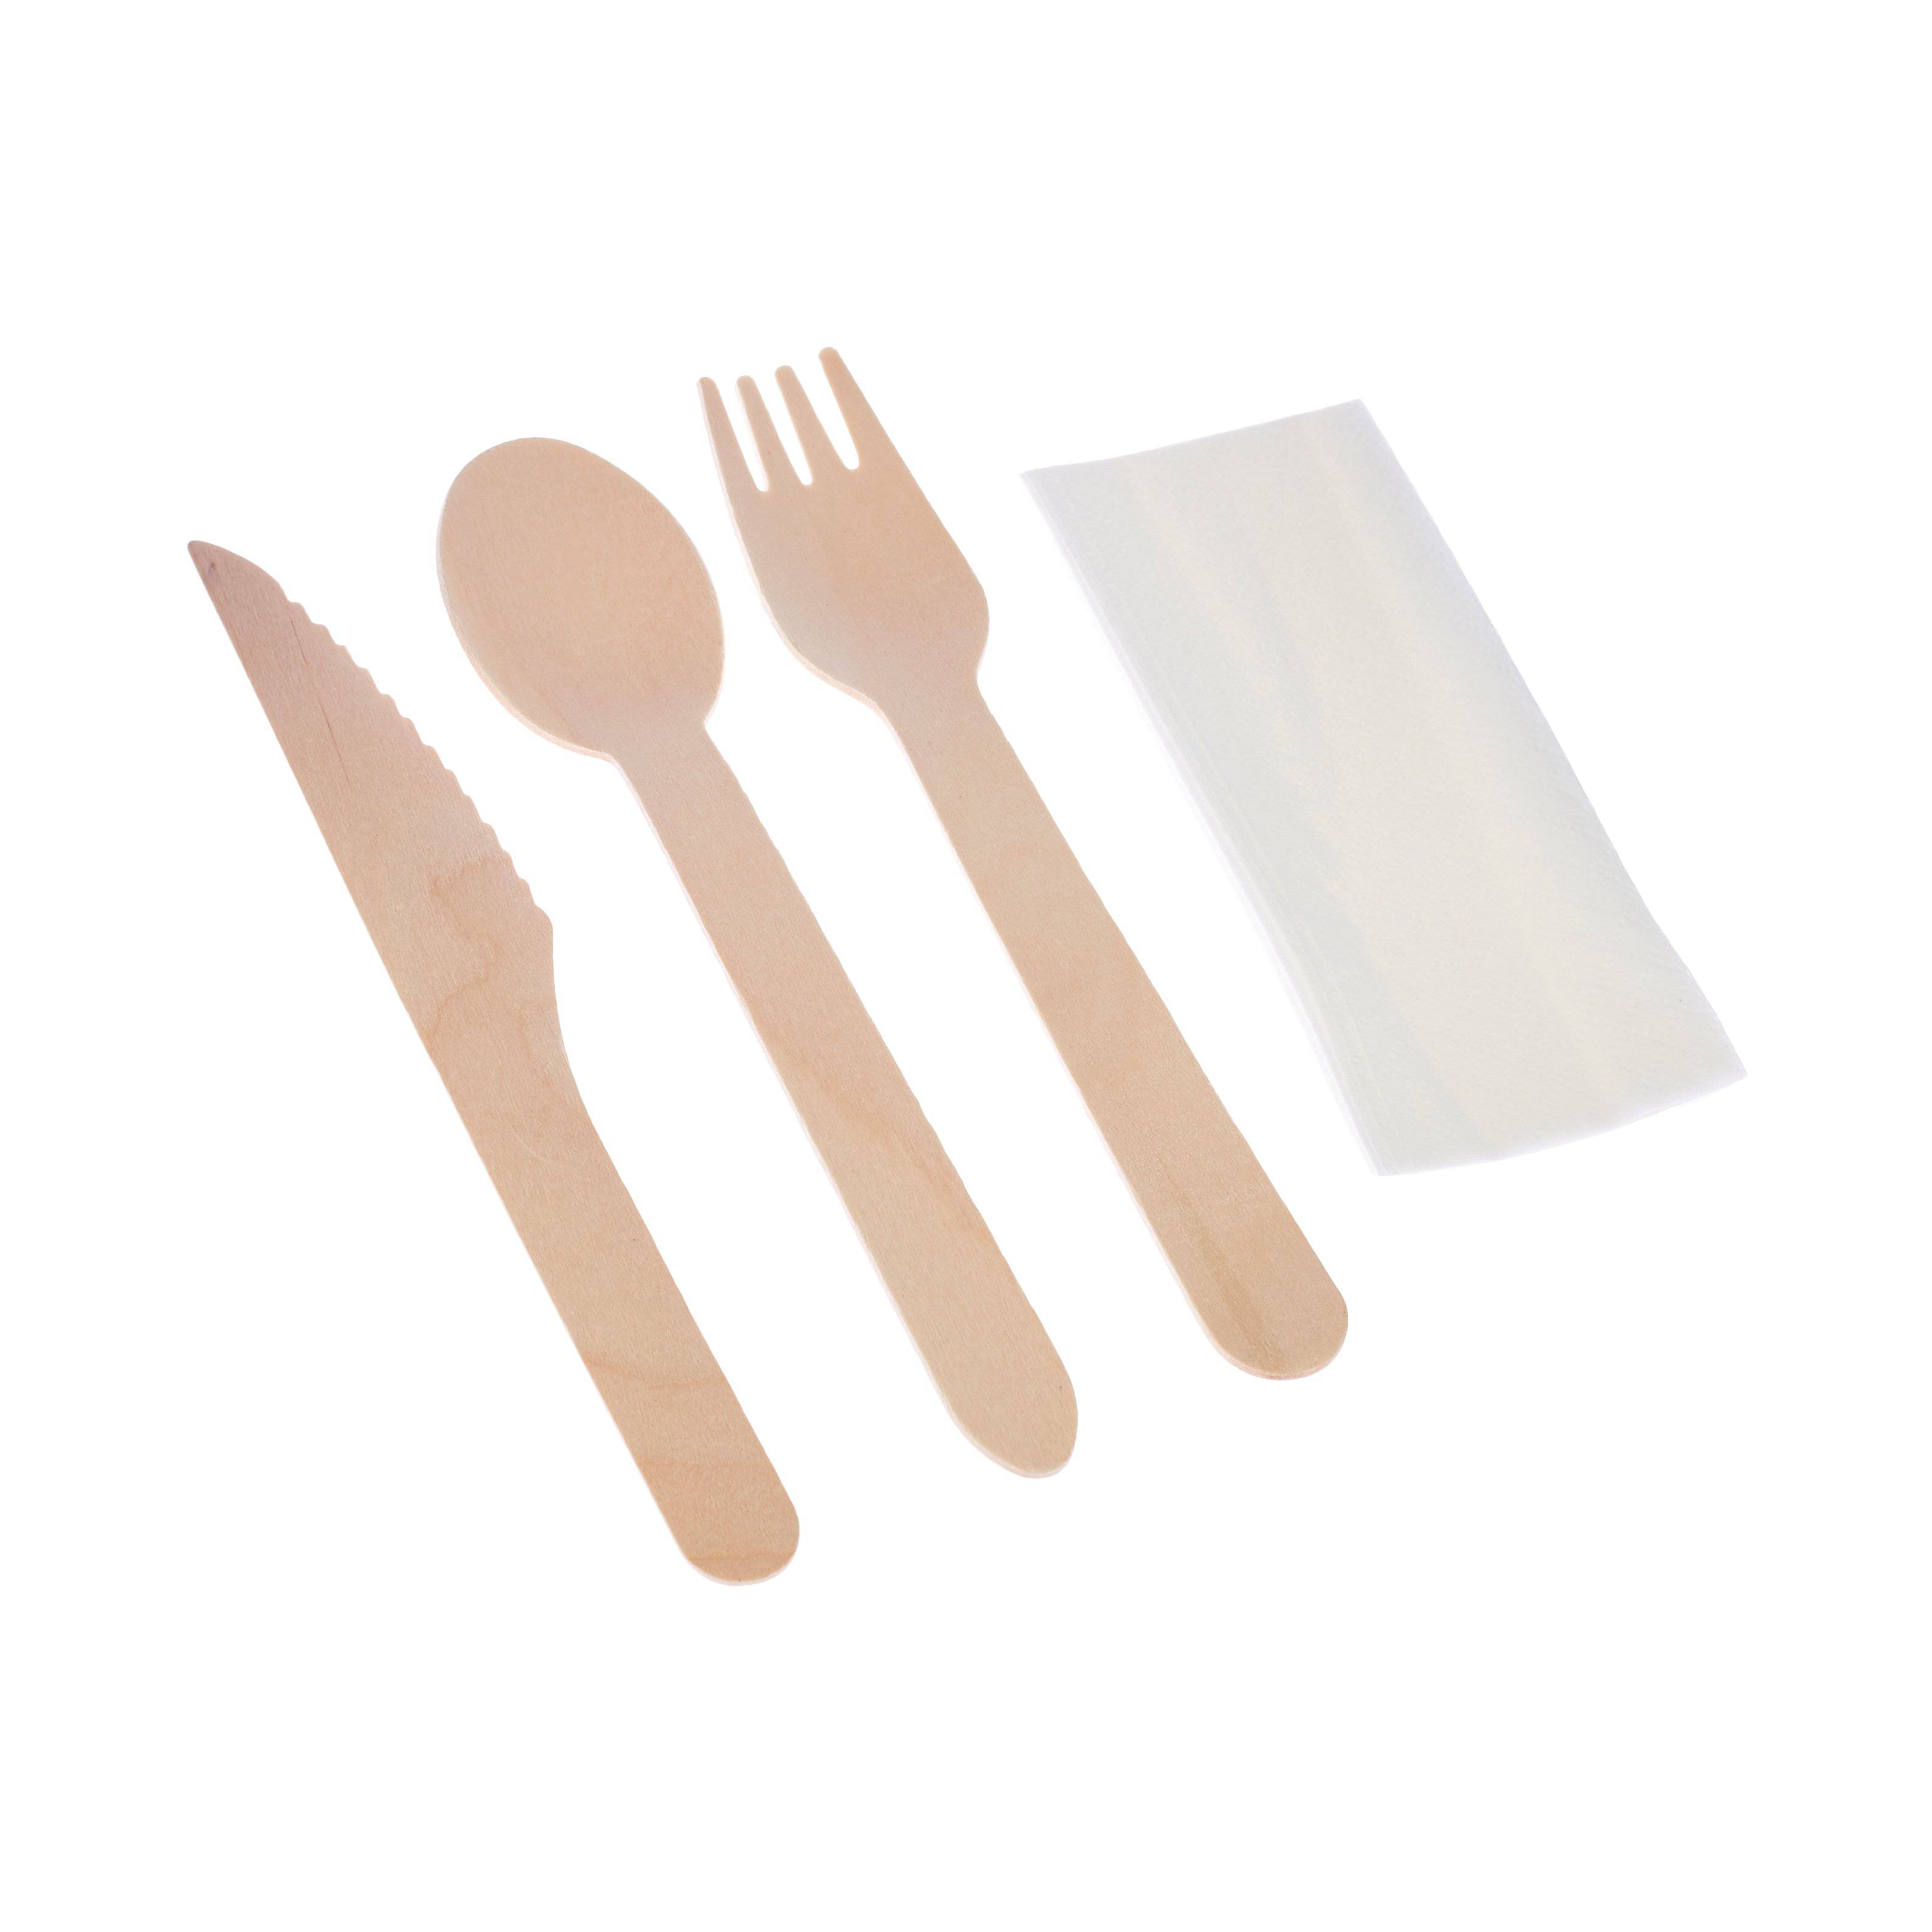 Wooden Cutlery Pack - Spoon, Fork, Knife, Napkin 250 Pieces - Hotpack Global